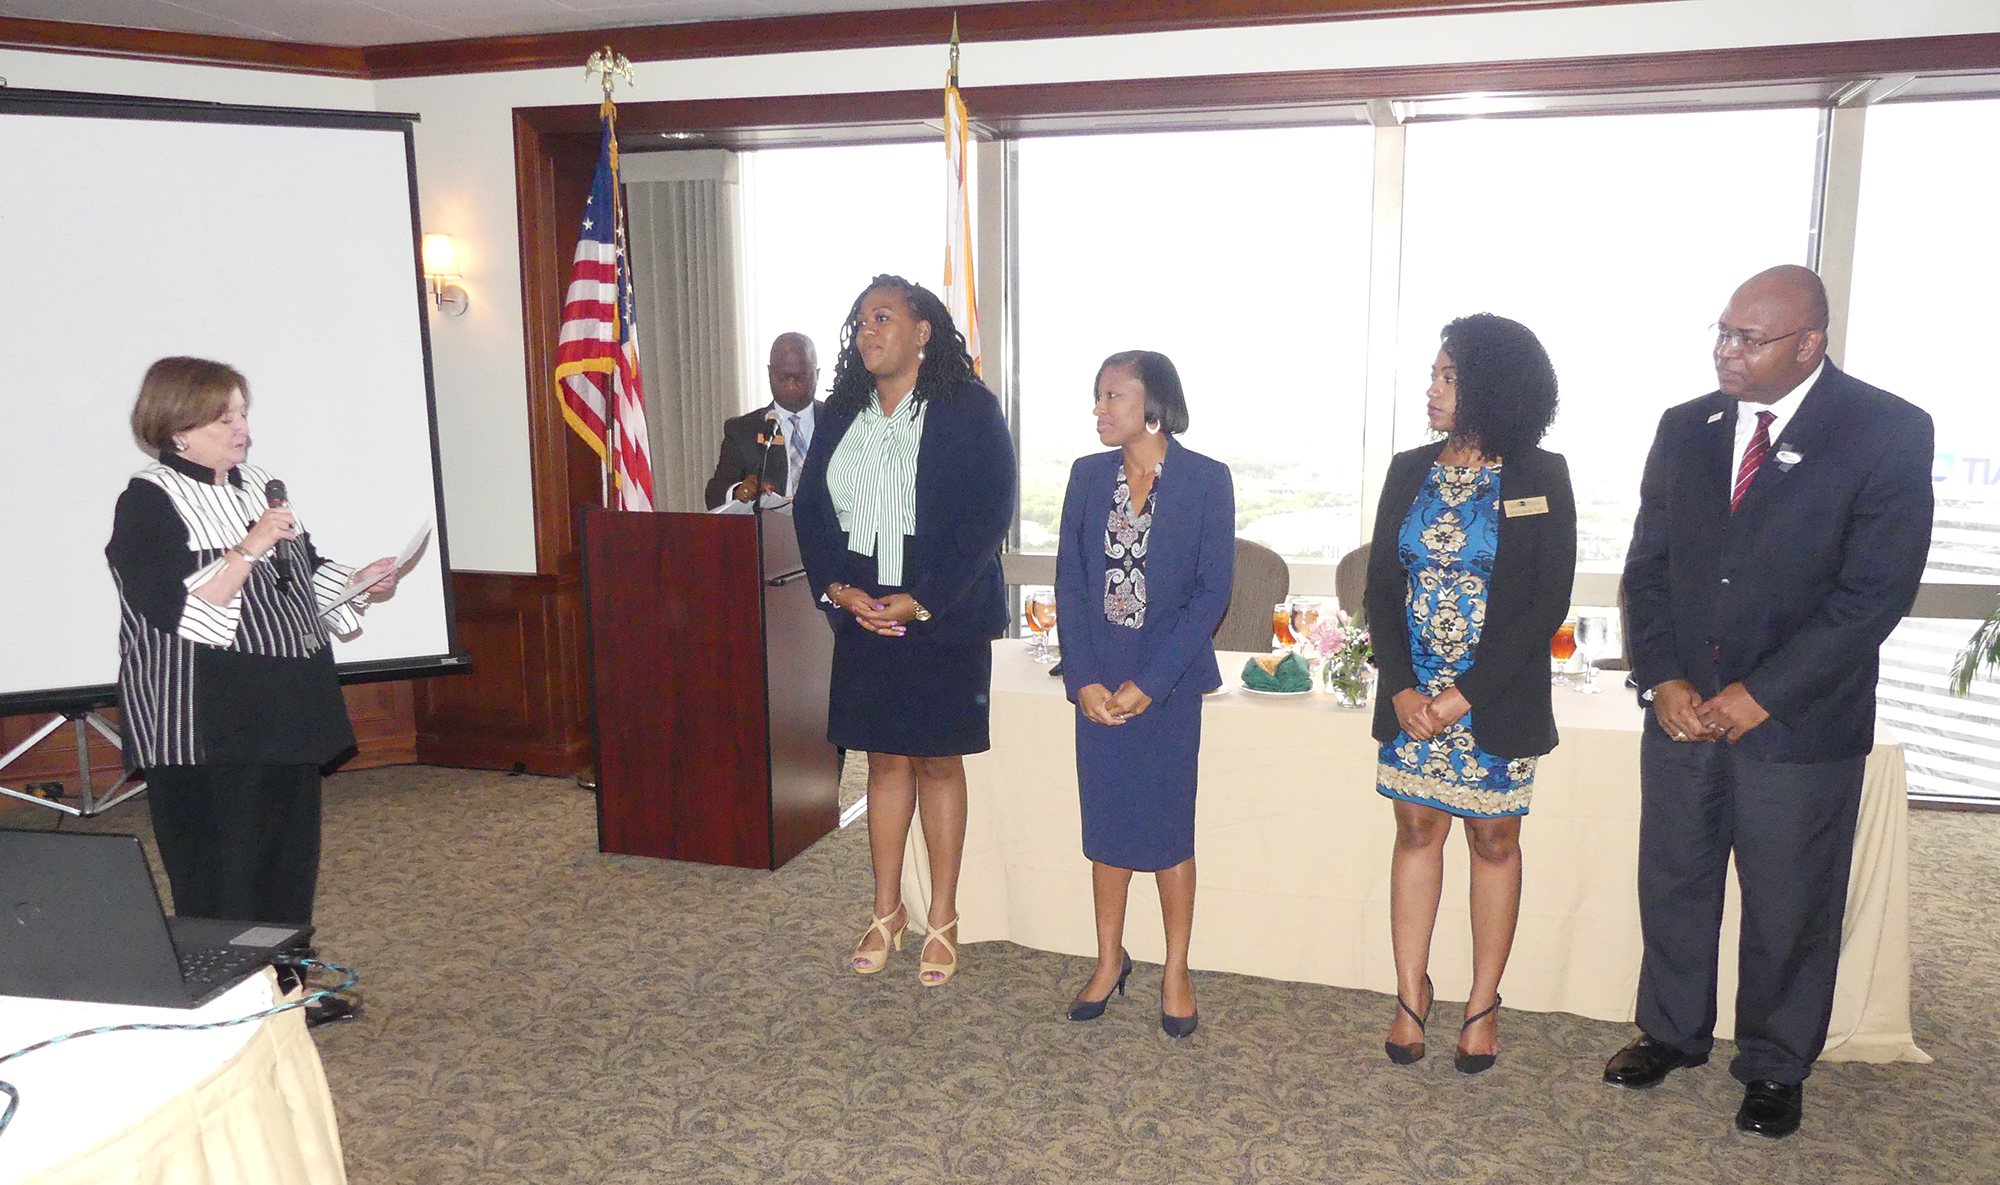 The D.W. Perkins Bar Association inducted its 2019-20 officers at its annual meeting last week at The River Club.